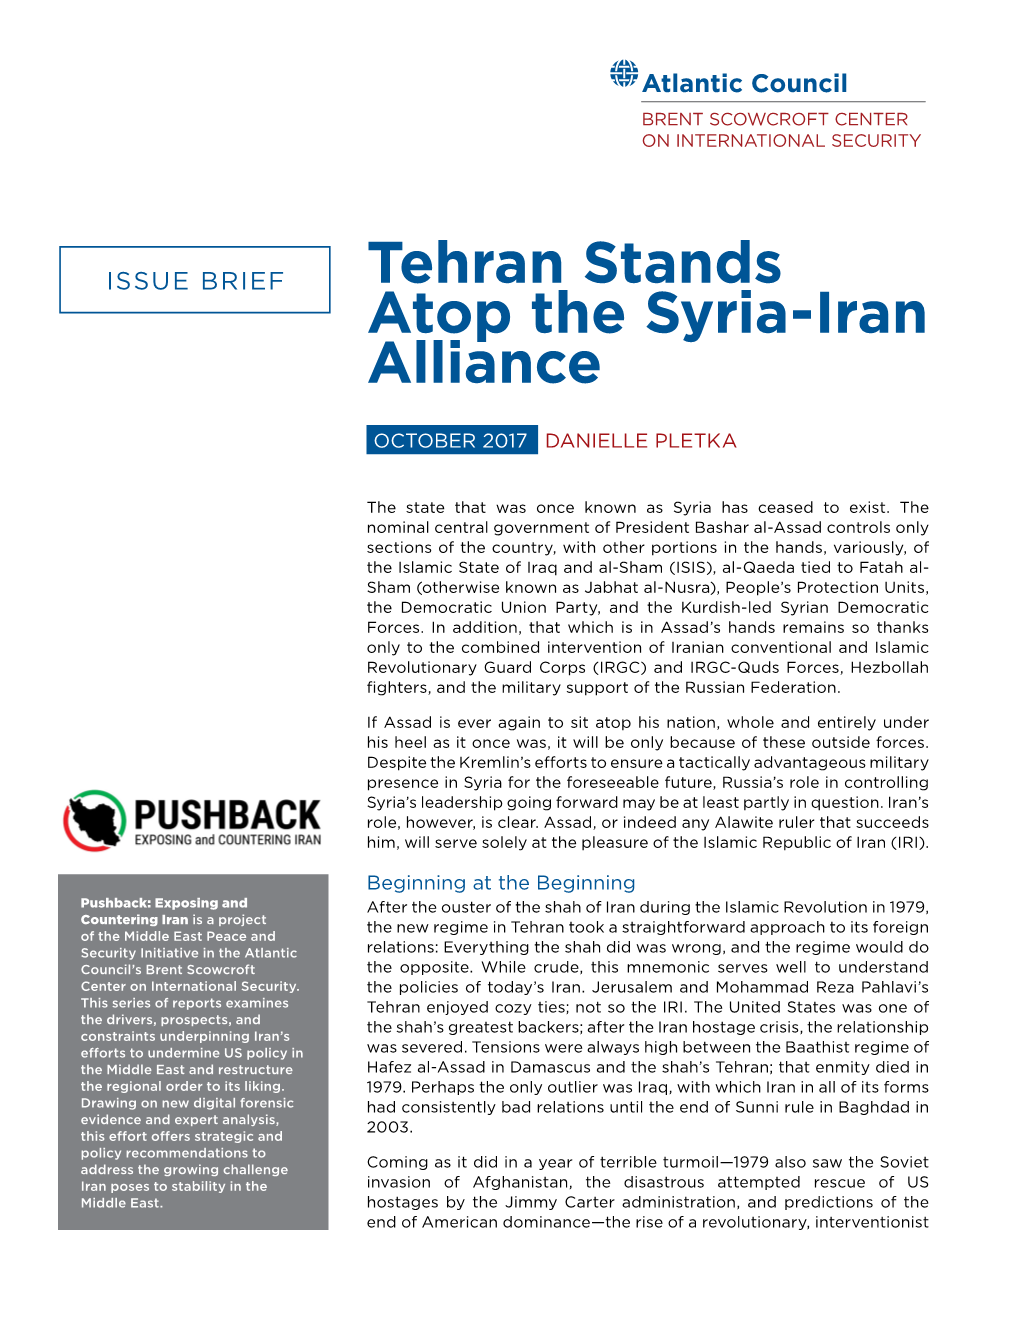 Tehran Stands Atop the Syria-Iran Alliance